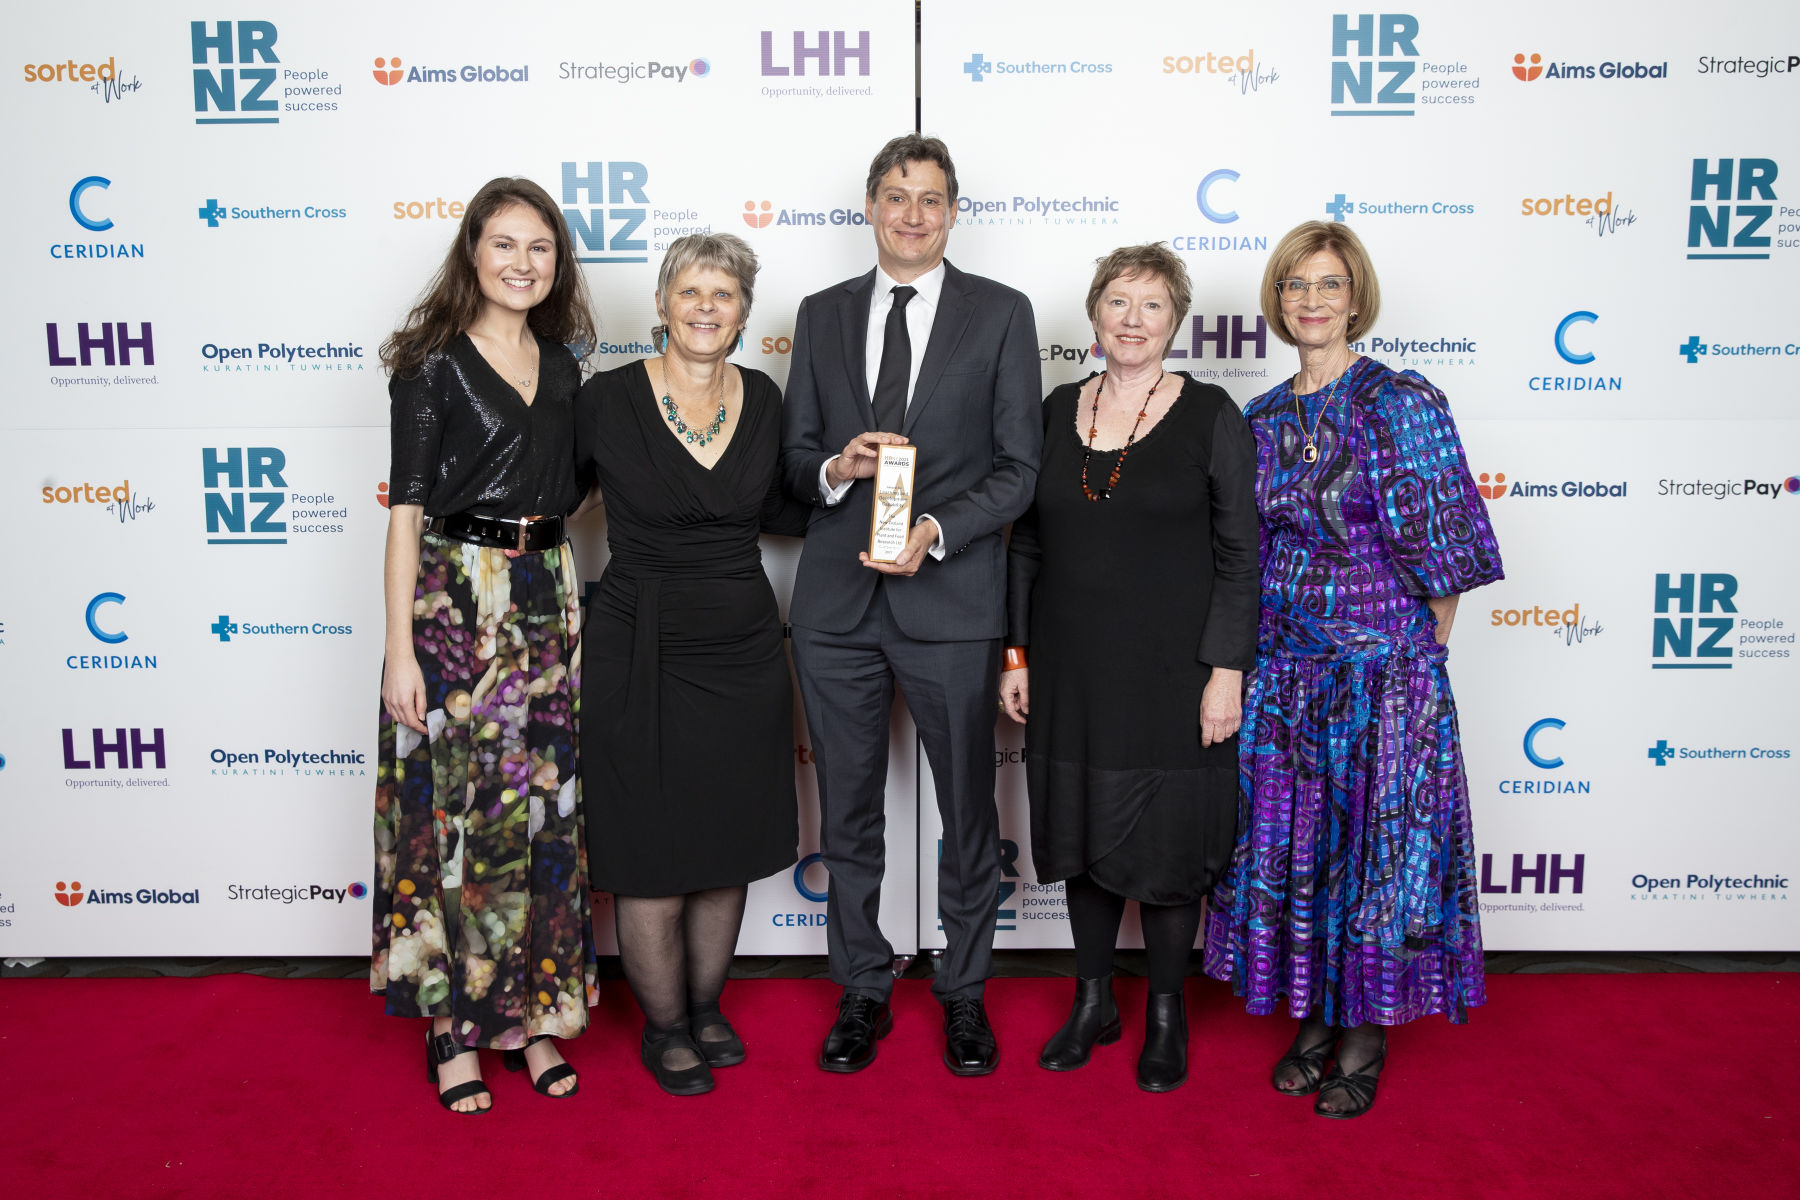 Plant & Food Research mentoring initiative wins HRNZ award